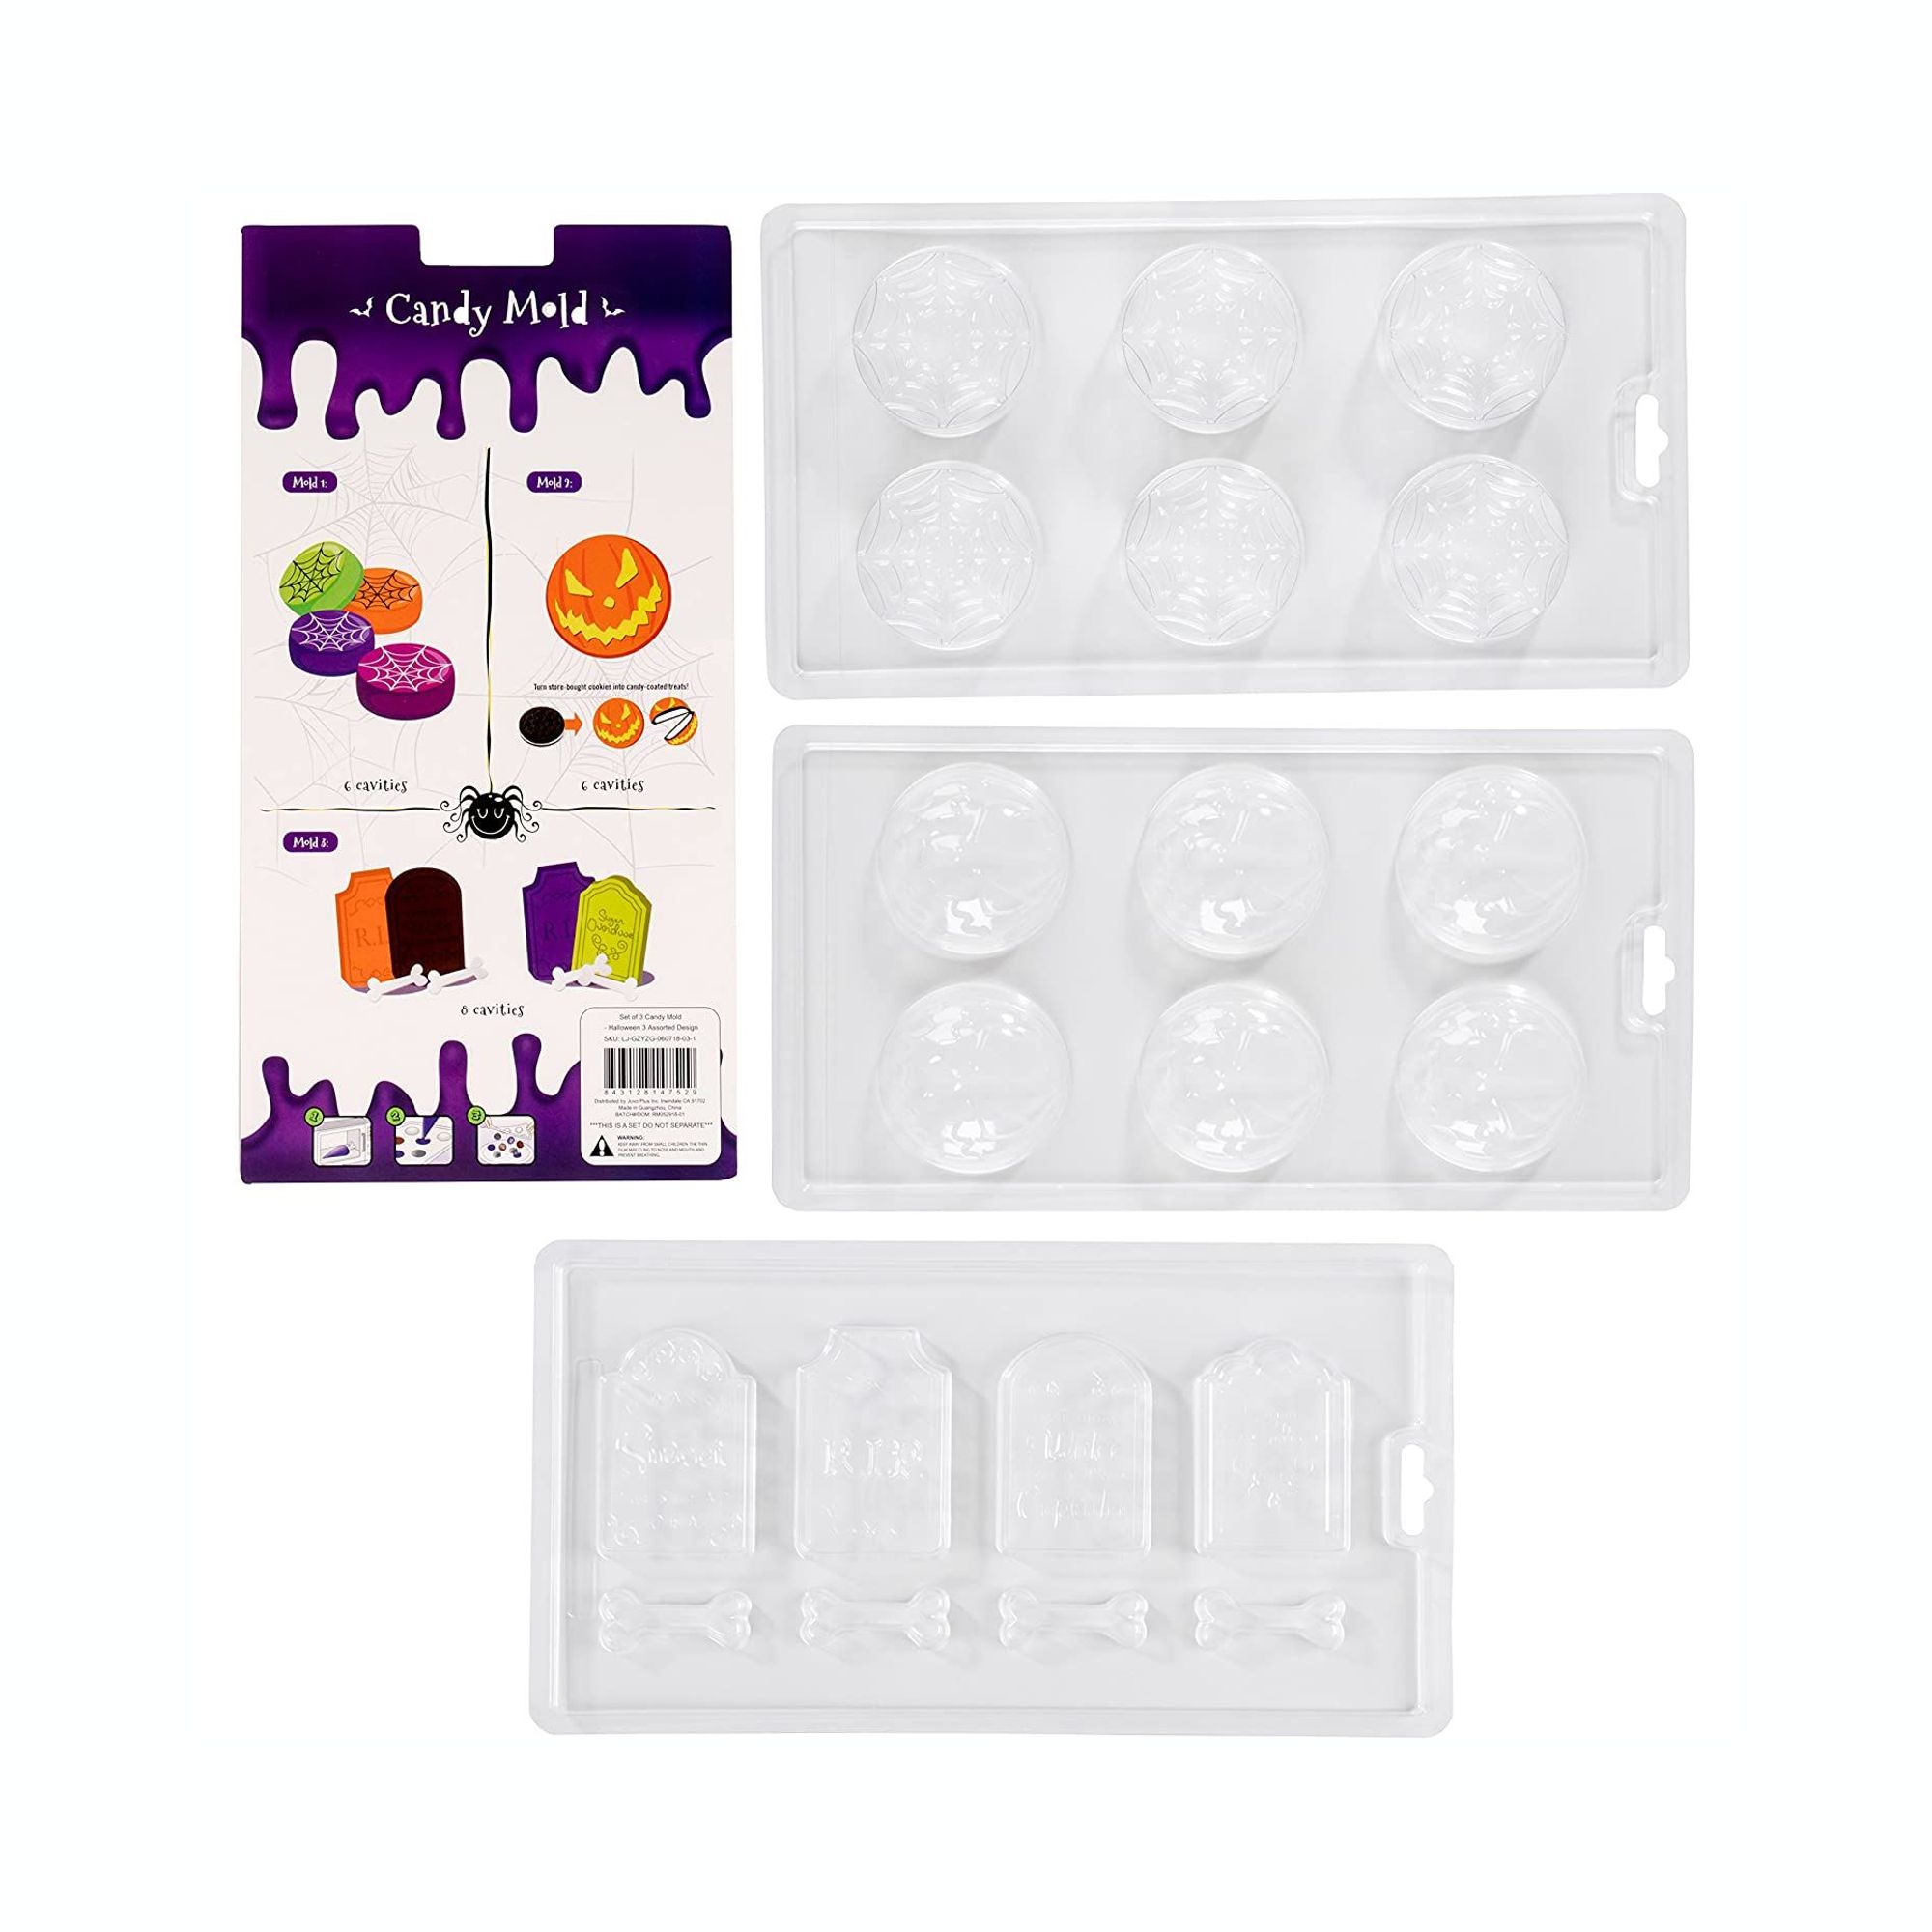 bedbathandbeyond.com | Juvale Halloween Chocolate Candy Molds - 3-Pack Decorating Molds for Halloween Parties, Holiday Theme Molds for Chocolate, Gummy Candy, Jello, Assorted Designs Including Spider Web, Pumpkin, Tombstones